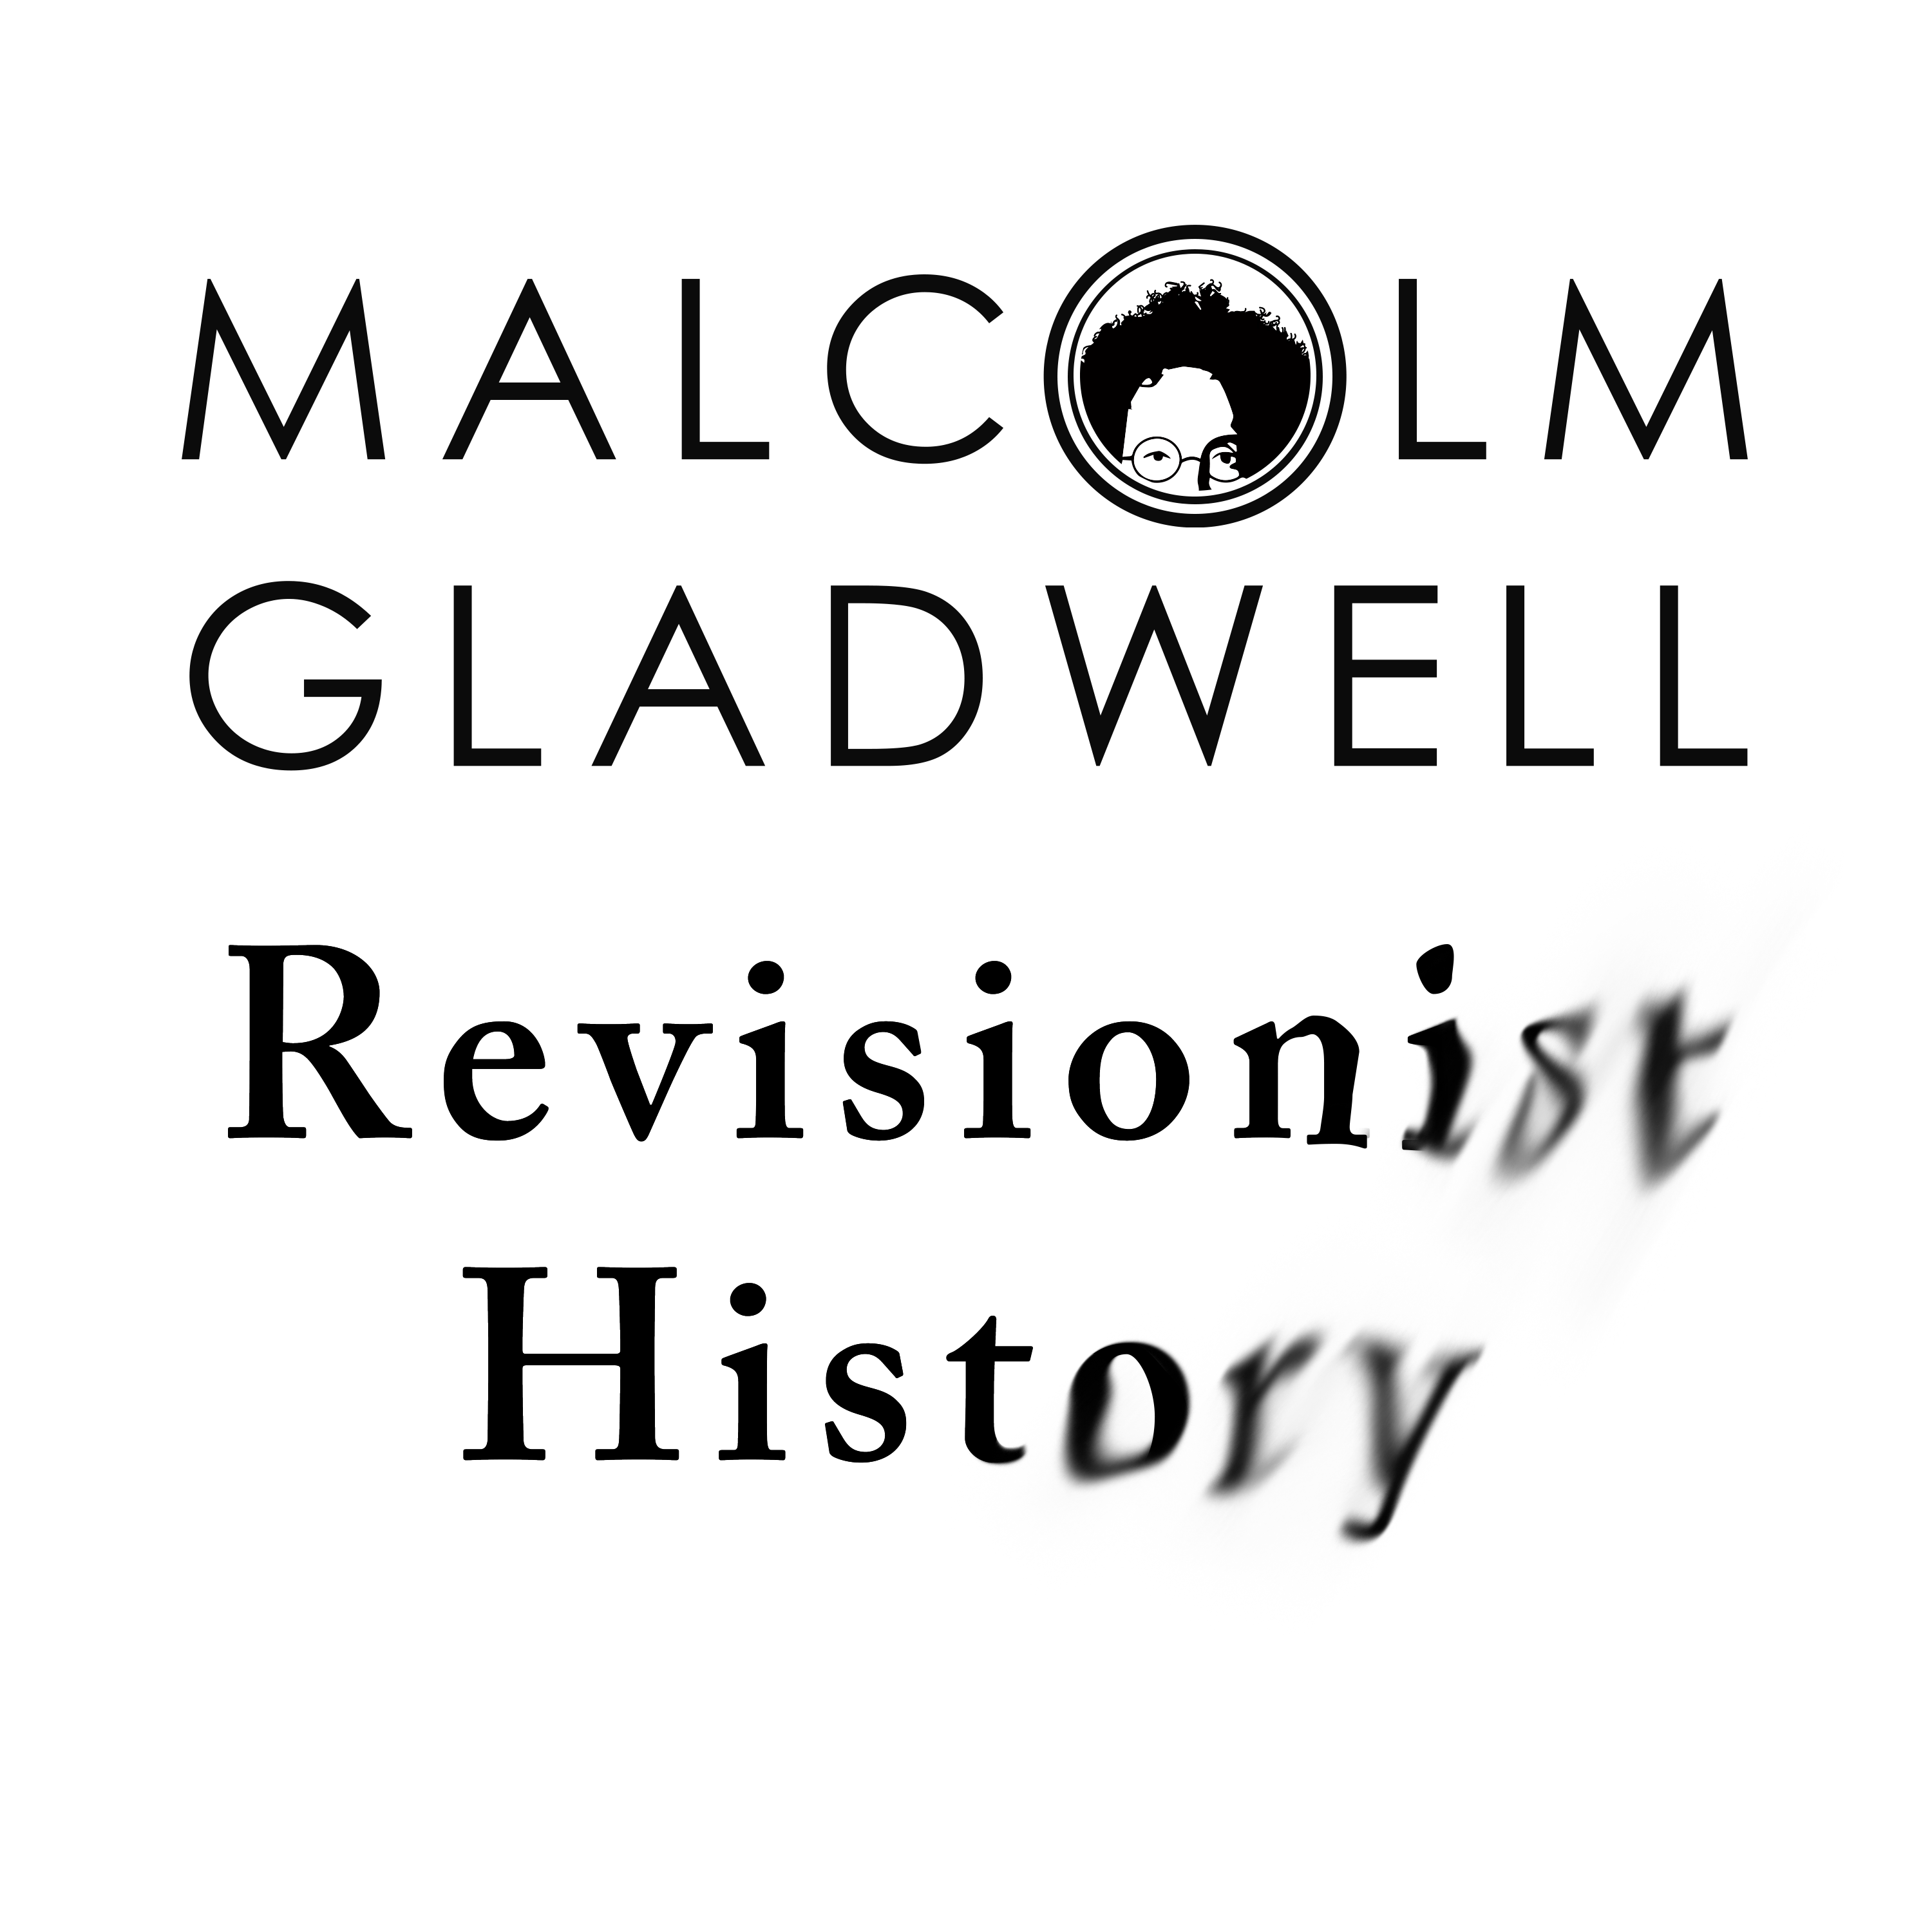 Revisionist History, Malcolm Gladwell